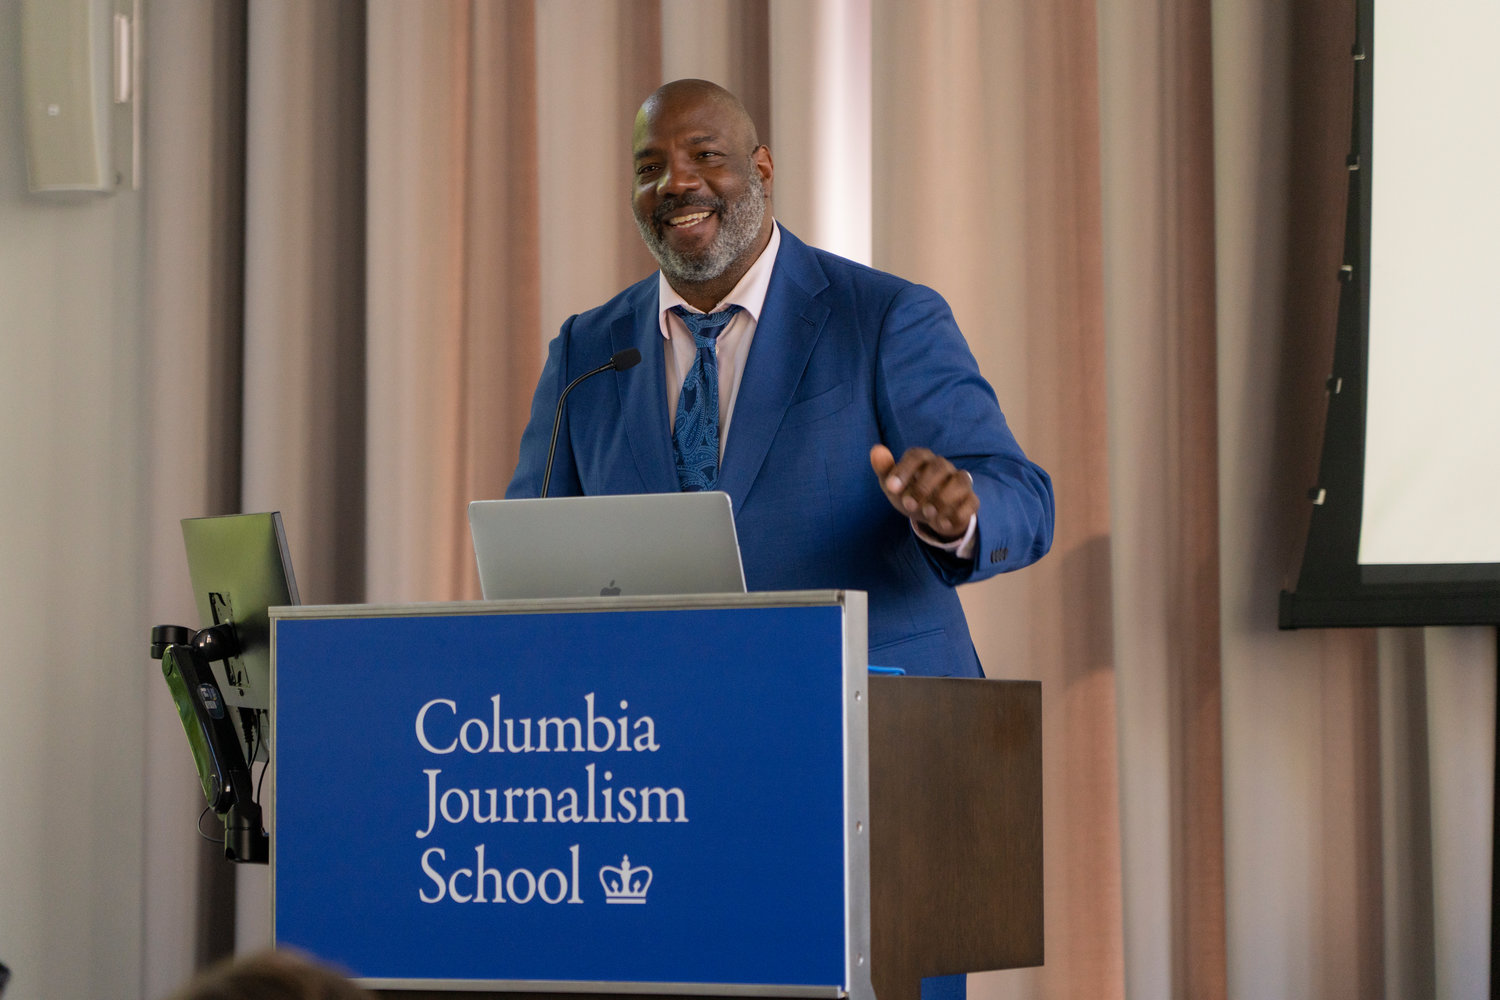 Columbia Journalism School Dean Dr. Jelani Cobb met students during orientation in August. Cobb, who has taught at the school for six years, was named the new dean Aug. 1. (Photo by Calla Kessler)